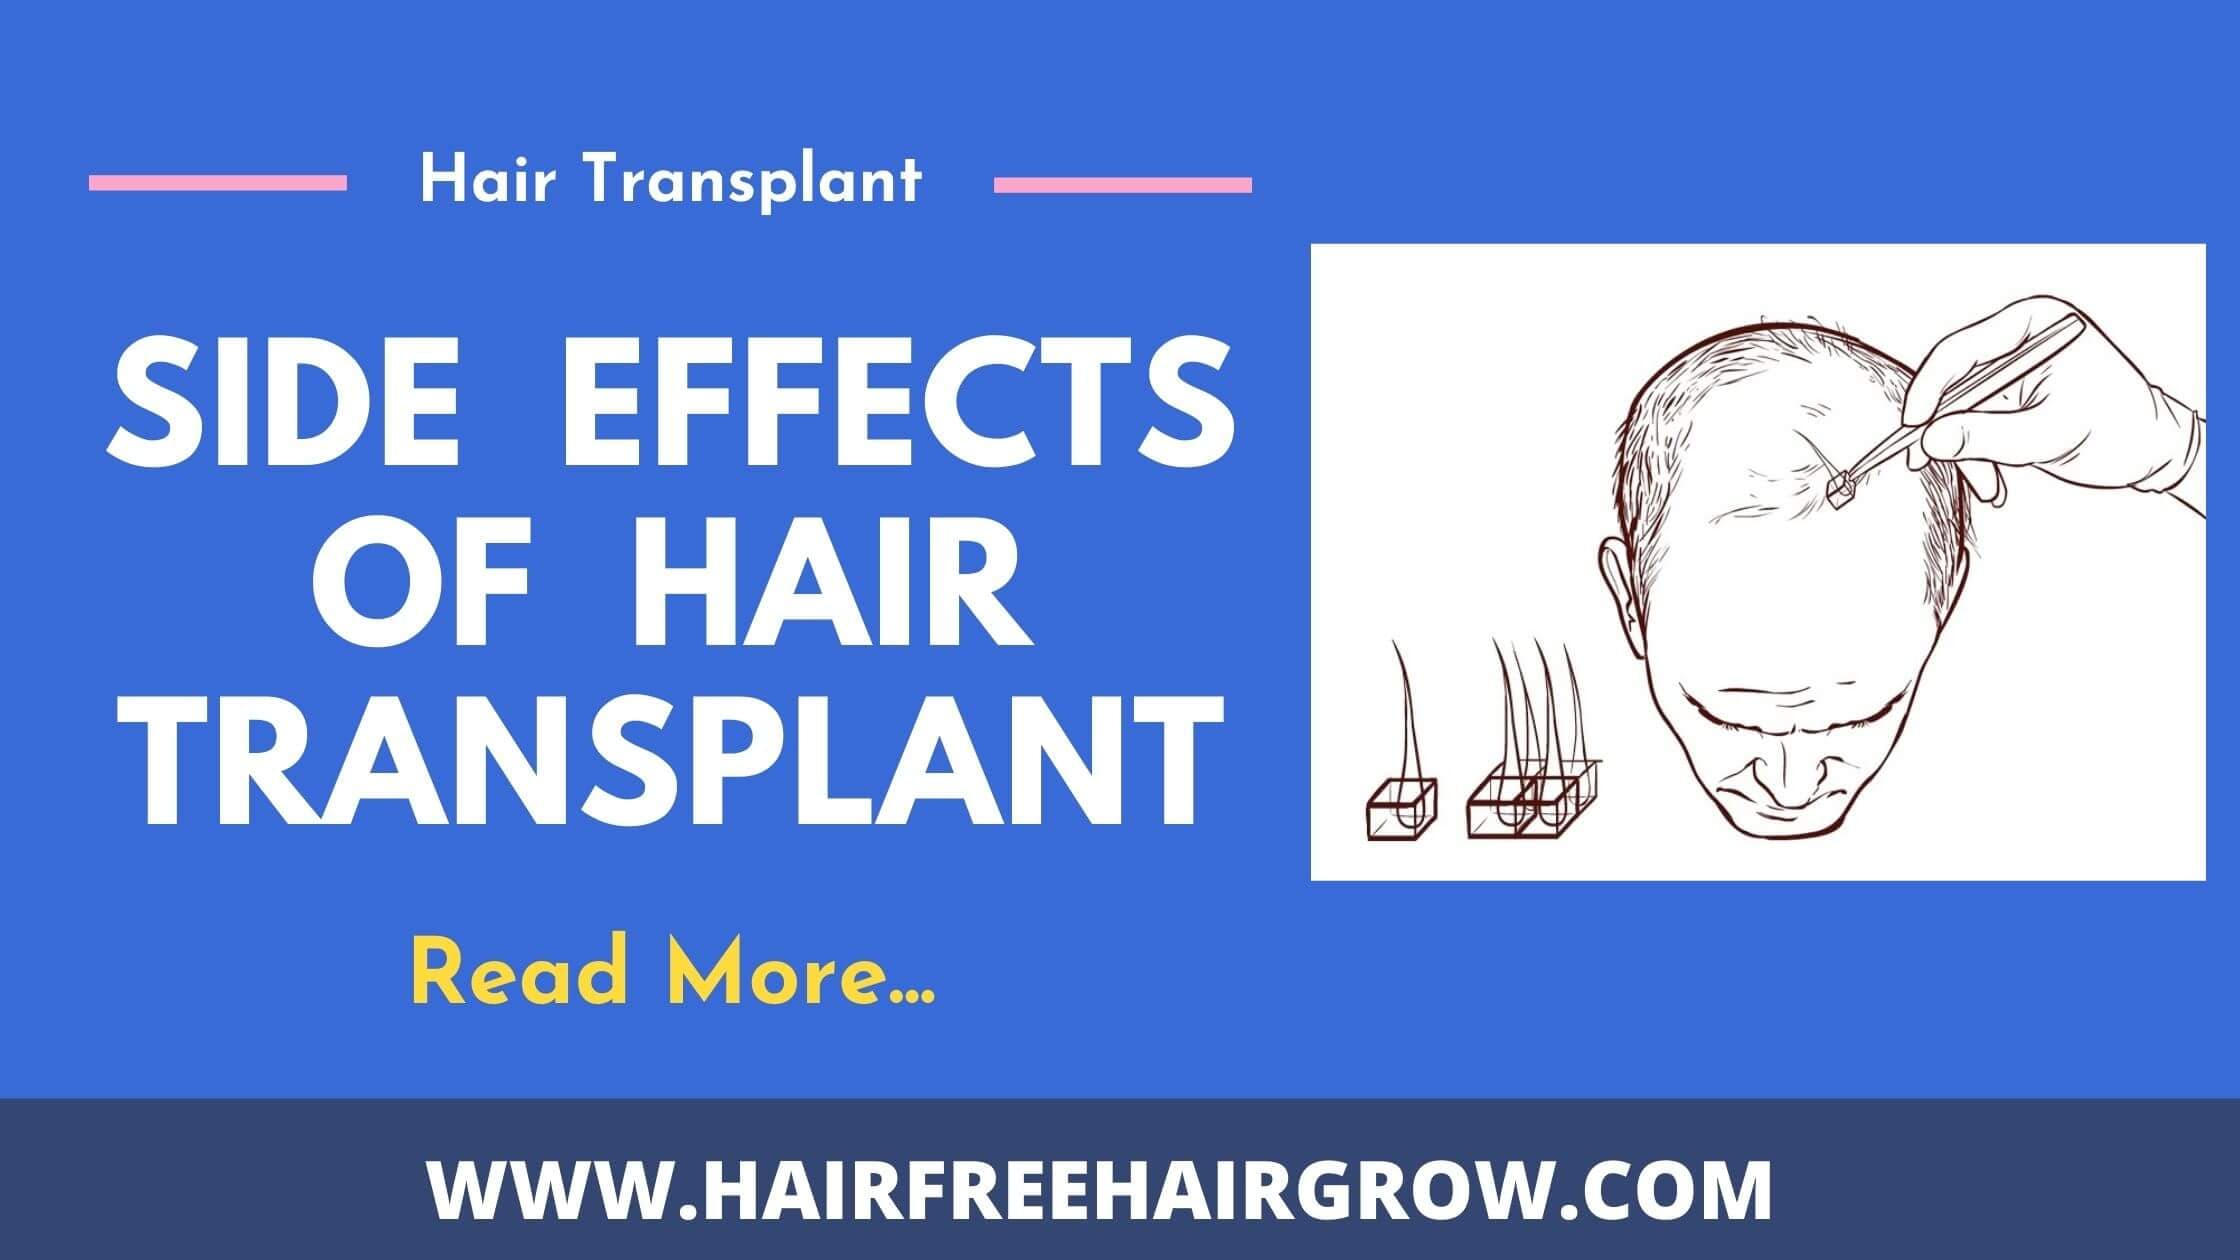 a graphical presentation of how hair transplant procedure is done and side effects of hair transplant